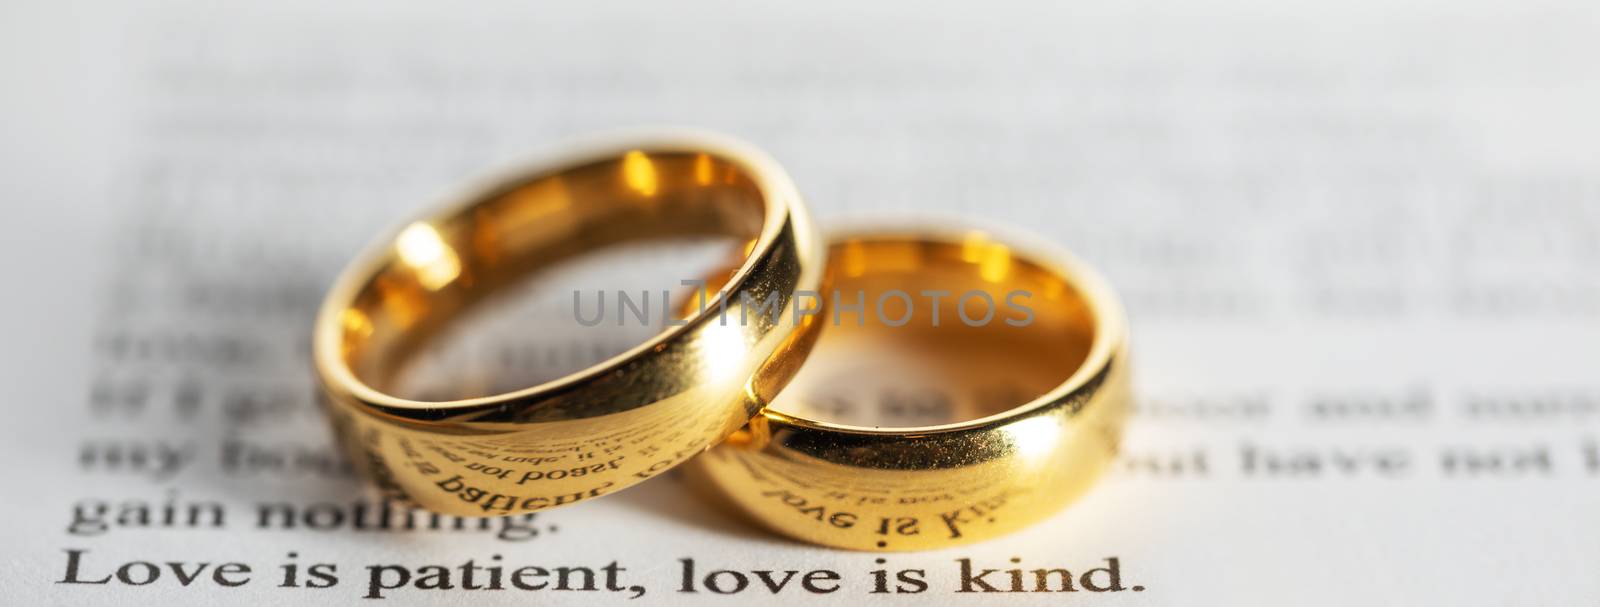 Golden wedding rings on bible book by Yellowj